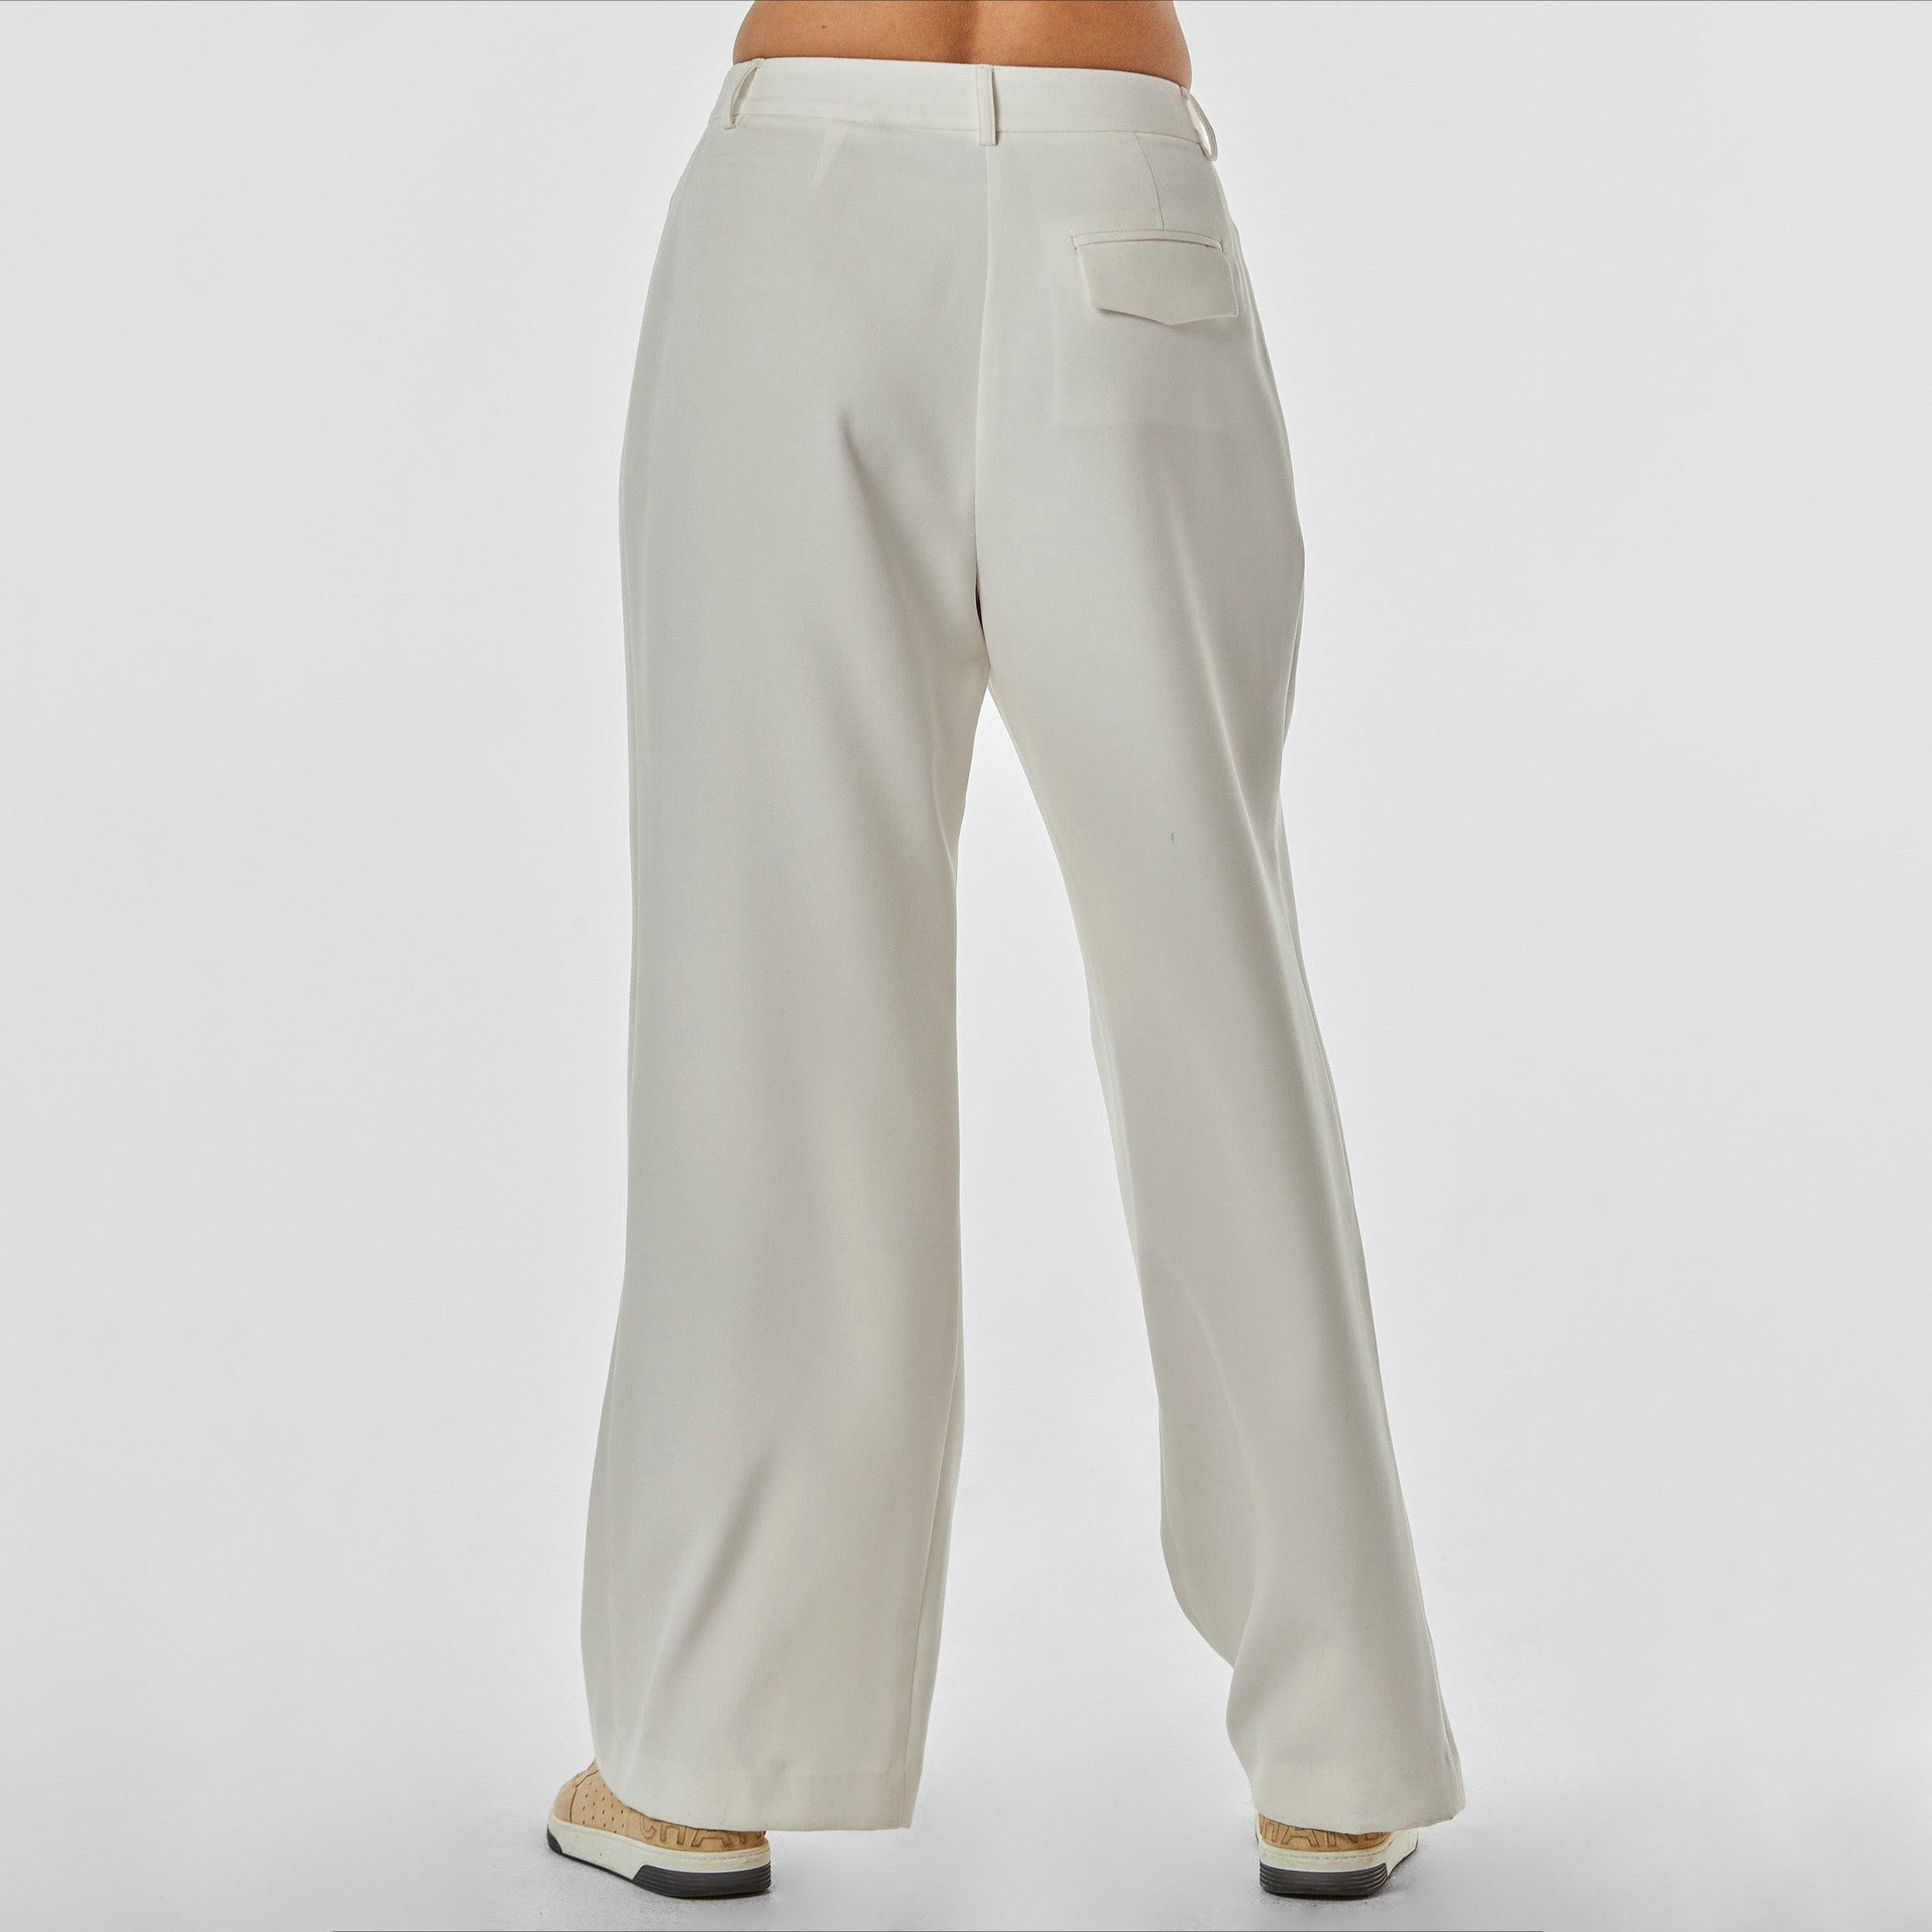 Rear view of woman wearing pleated cream colored trousers with stretch fabric